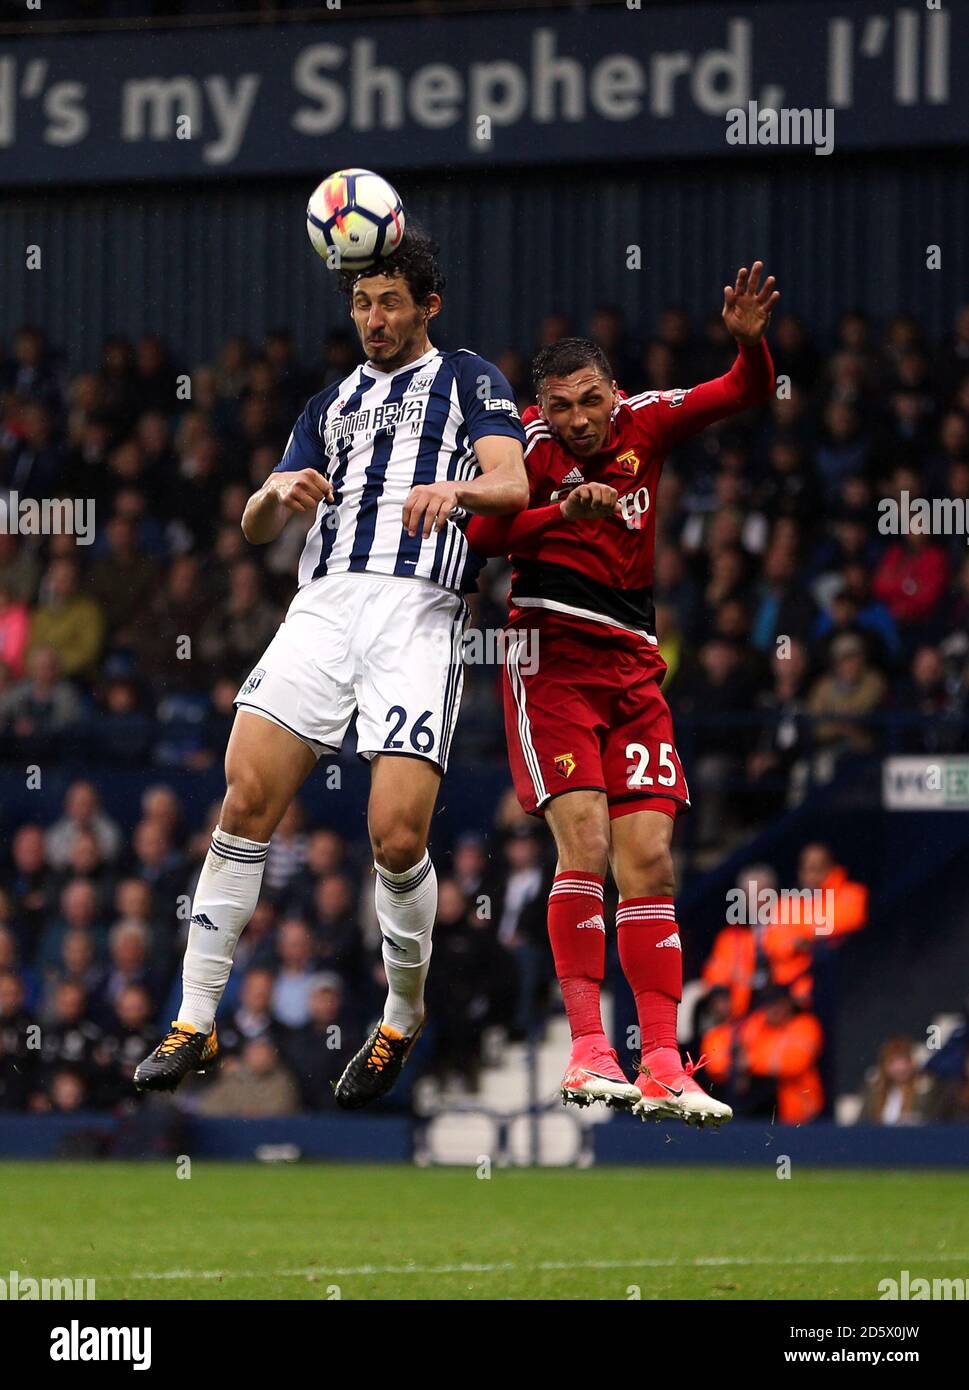 West Bromwich Albion's Ahmed Hegazy and Watford's Jose Holebas jump for a header Stock Photo